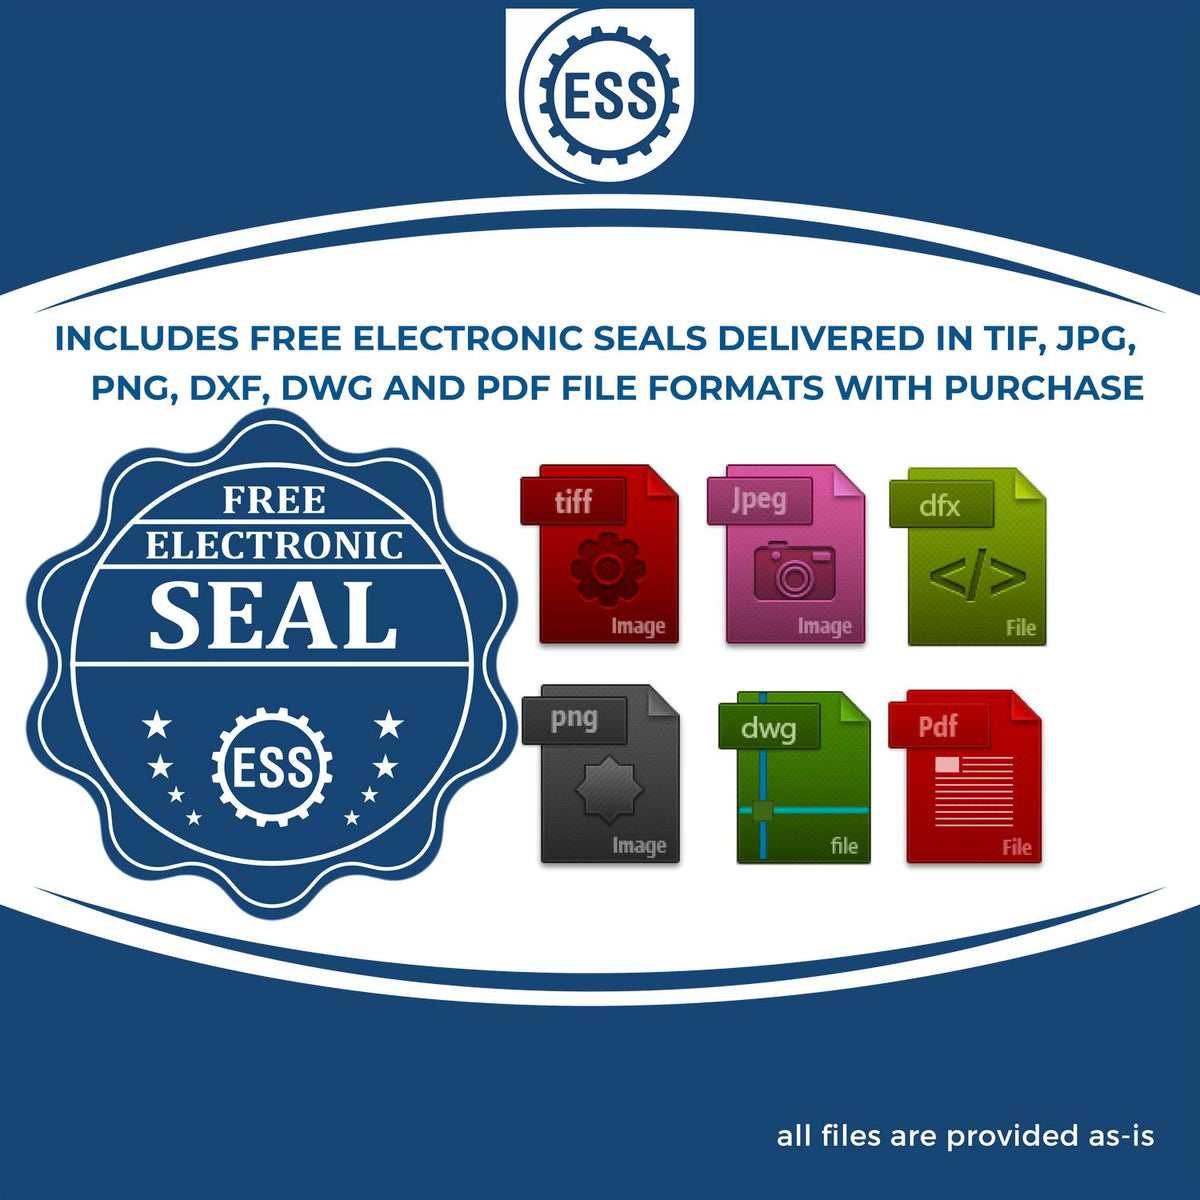 An infographic for the free electronic seal for the Premium MaxLight Pre-Inked Arizona Landscape Architectural Stamp illustrating the different file type icons such as DXF, DWG, TIF, JPG and PNG.